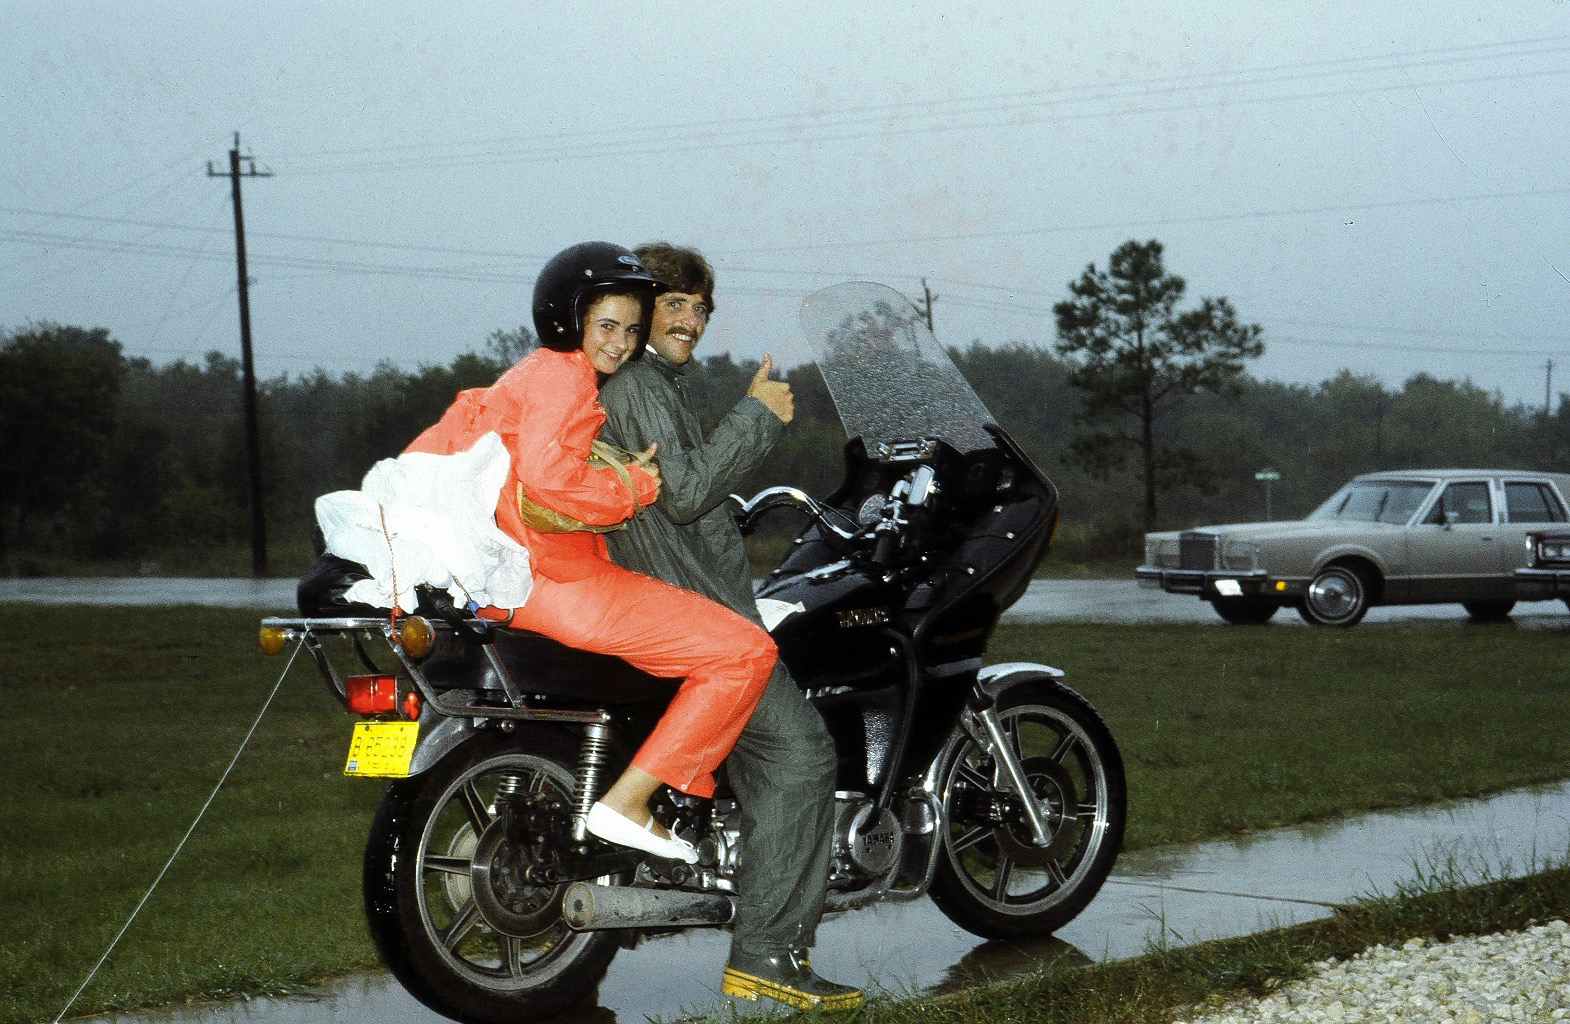 Anne and Brian Bercht on motorcycle after wedding